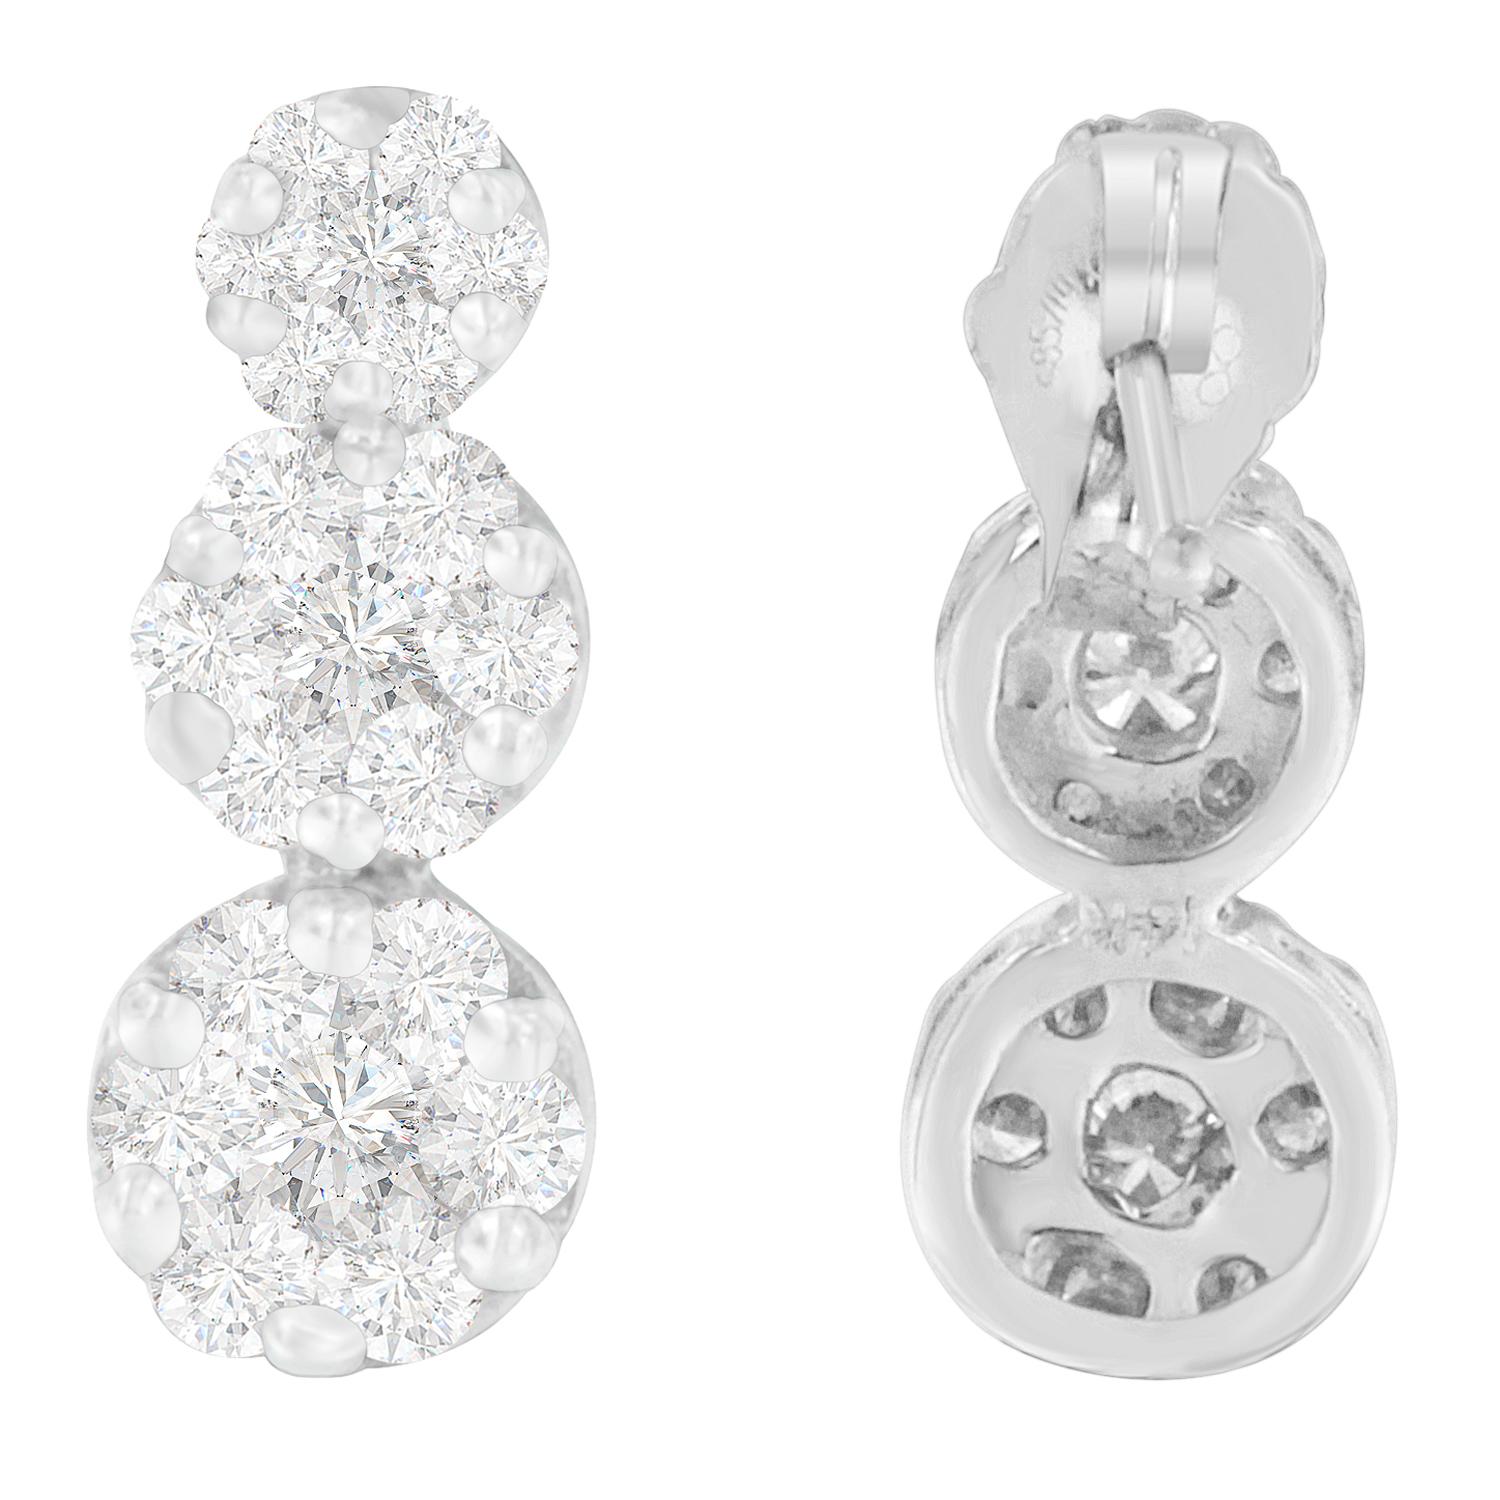 She will adore her look when she wears these diamond dangle earrings. Composed of lustrous 14 karats white gold, it features three round shaped accents in different sizes. Each of the earrings is adorned with sparkling round cut diamonds that are